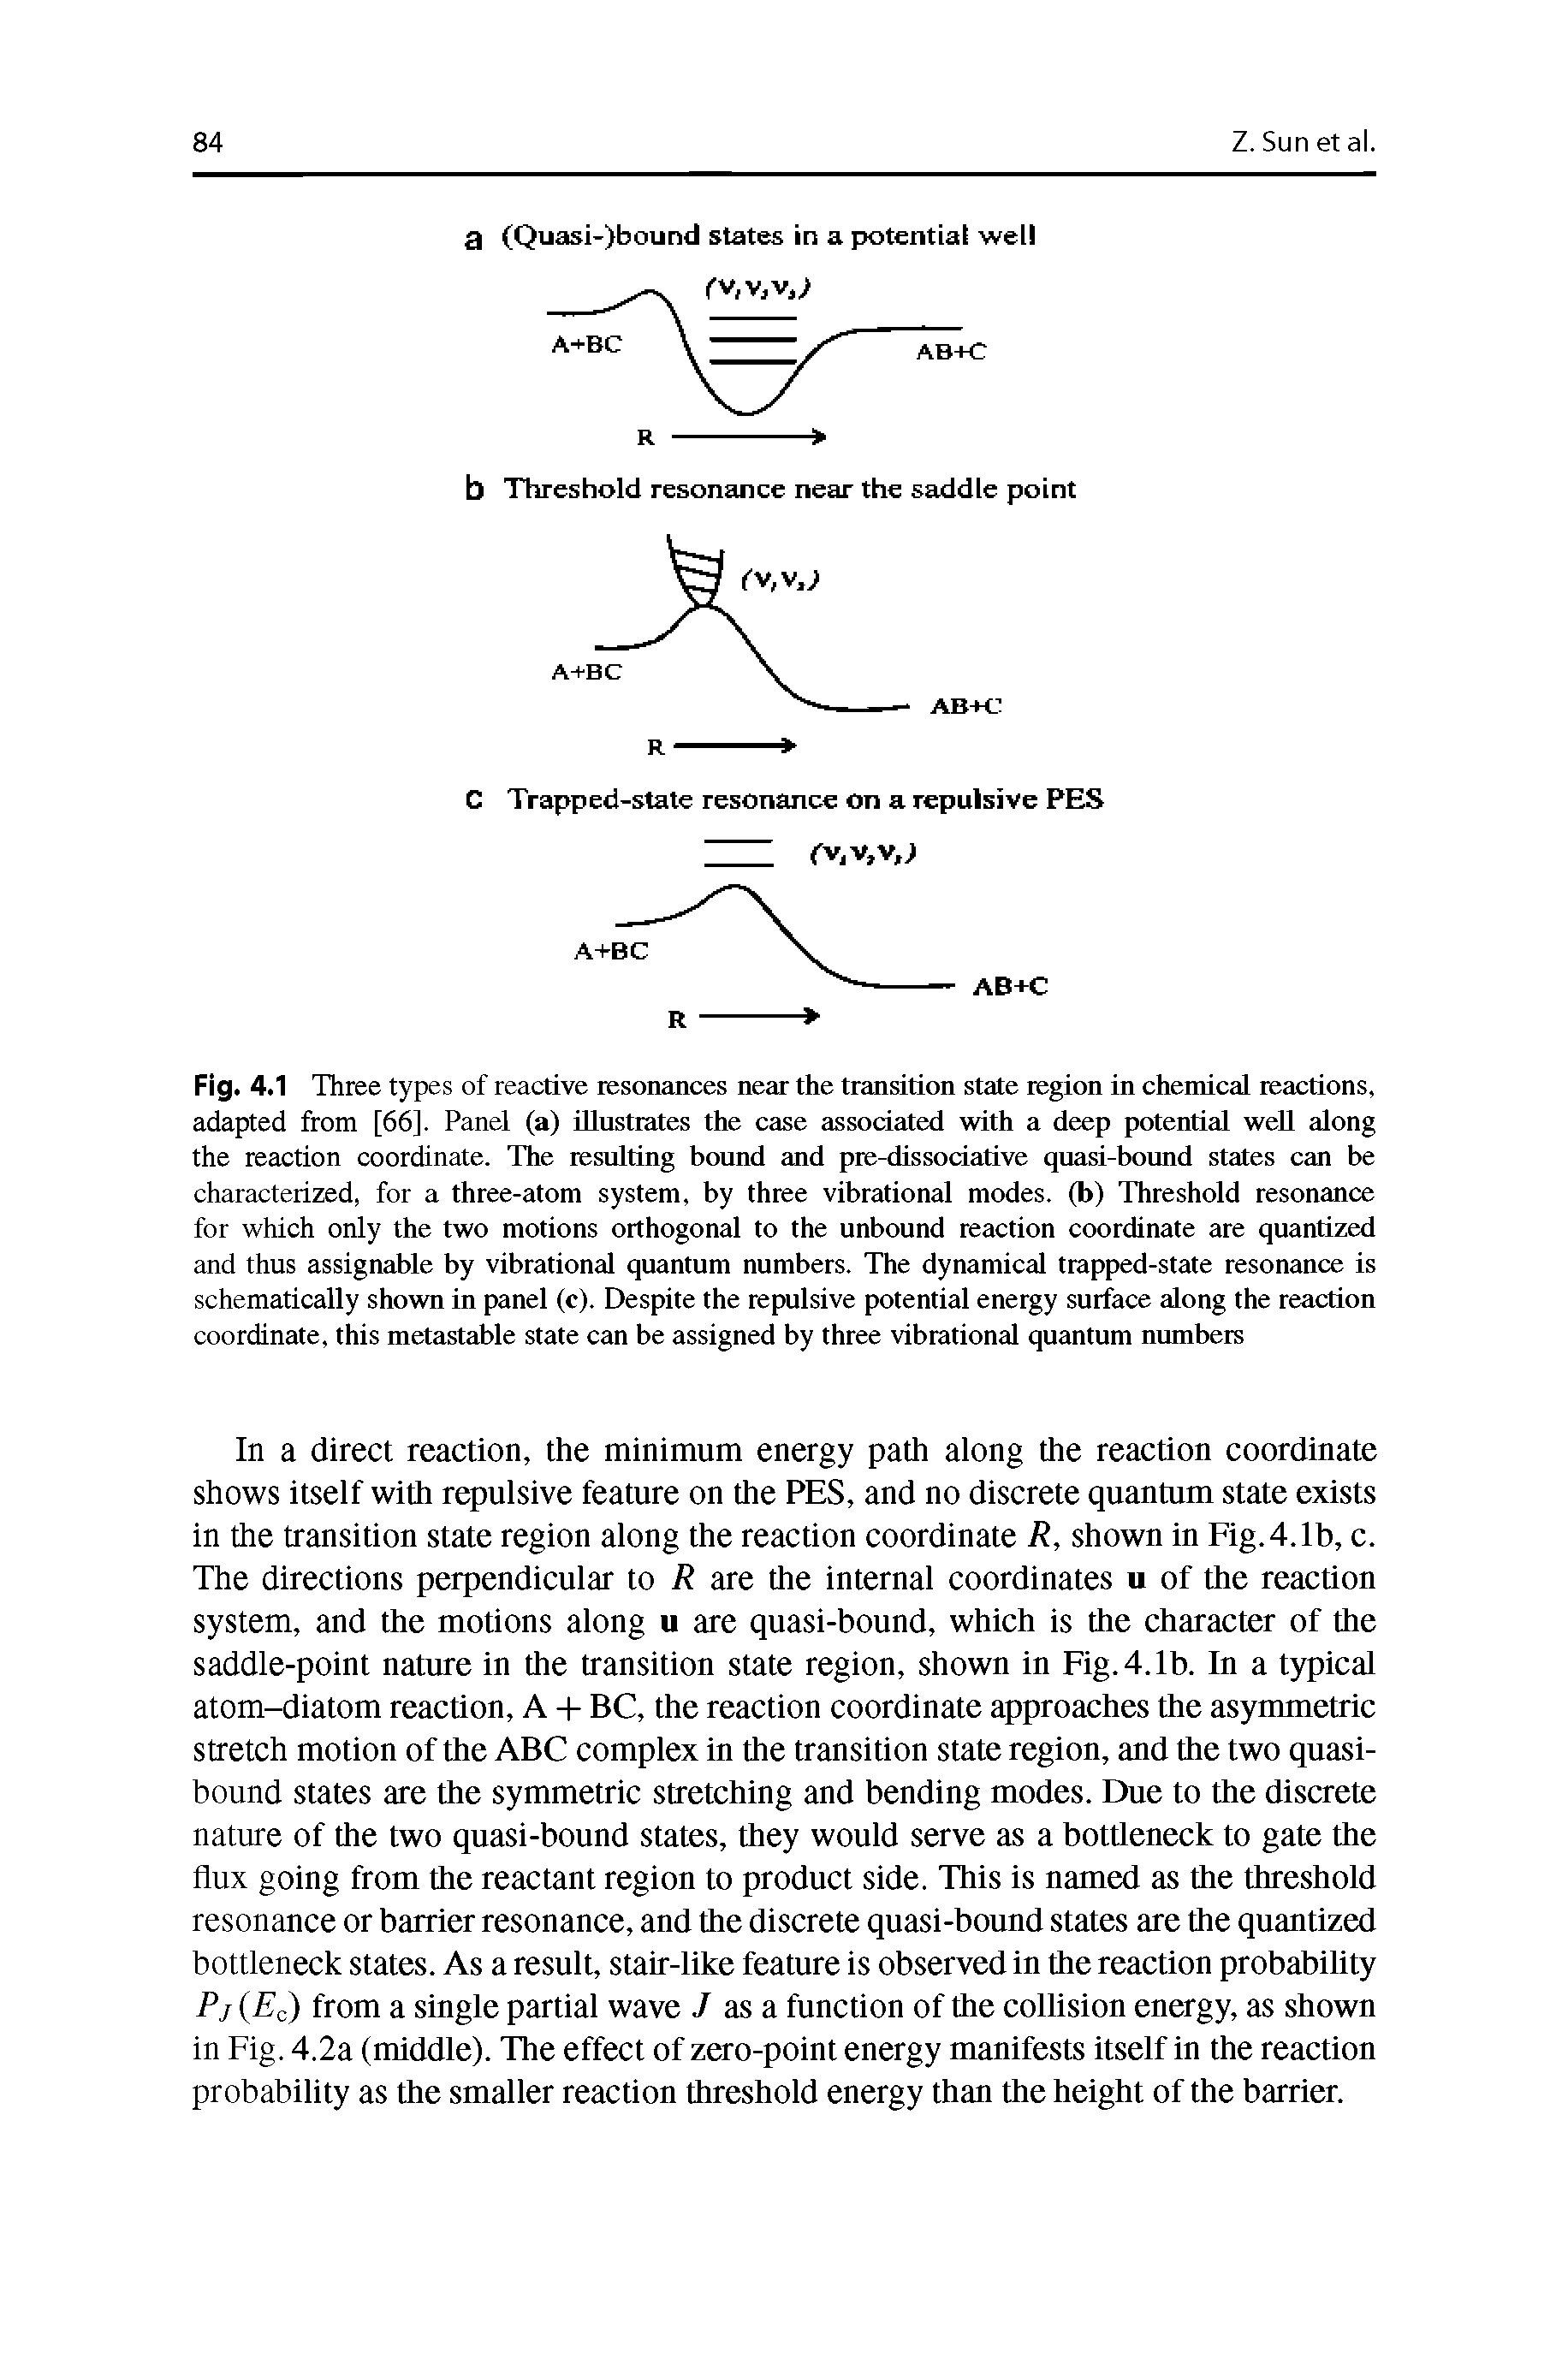 Fig. 4.1 Three types of reactive resonances near the transition state region in chemical reactions, adapted from [66]. Panel (a) illustrates the case associated with a deep potential well along the reaction coordinate. The resulting bound and pie-dissociative quasi-bound states can be characterized, for a three-atom system, by three vibrational modes, (b) Threshold resonance for which only the two motions orthogontil to the unbound reaction coordinate tire quantized and thus assignable by vibrational quantum numbers. The dynamical trapped-state resonance is schematically shown in panel (c). Despite the repulsive potential energy surface along the reaction coordinate, this metastable state can be assigned by three vibrational quantum numbers...